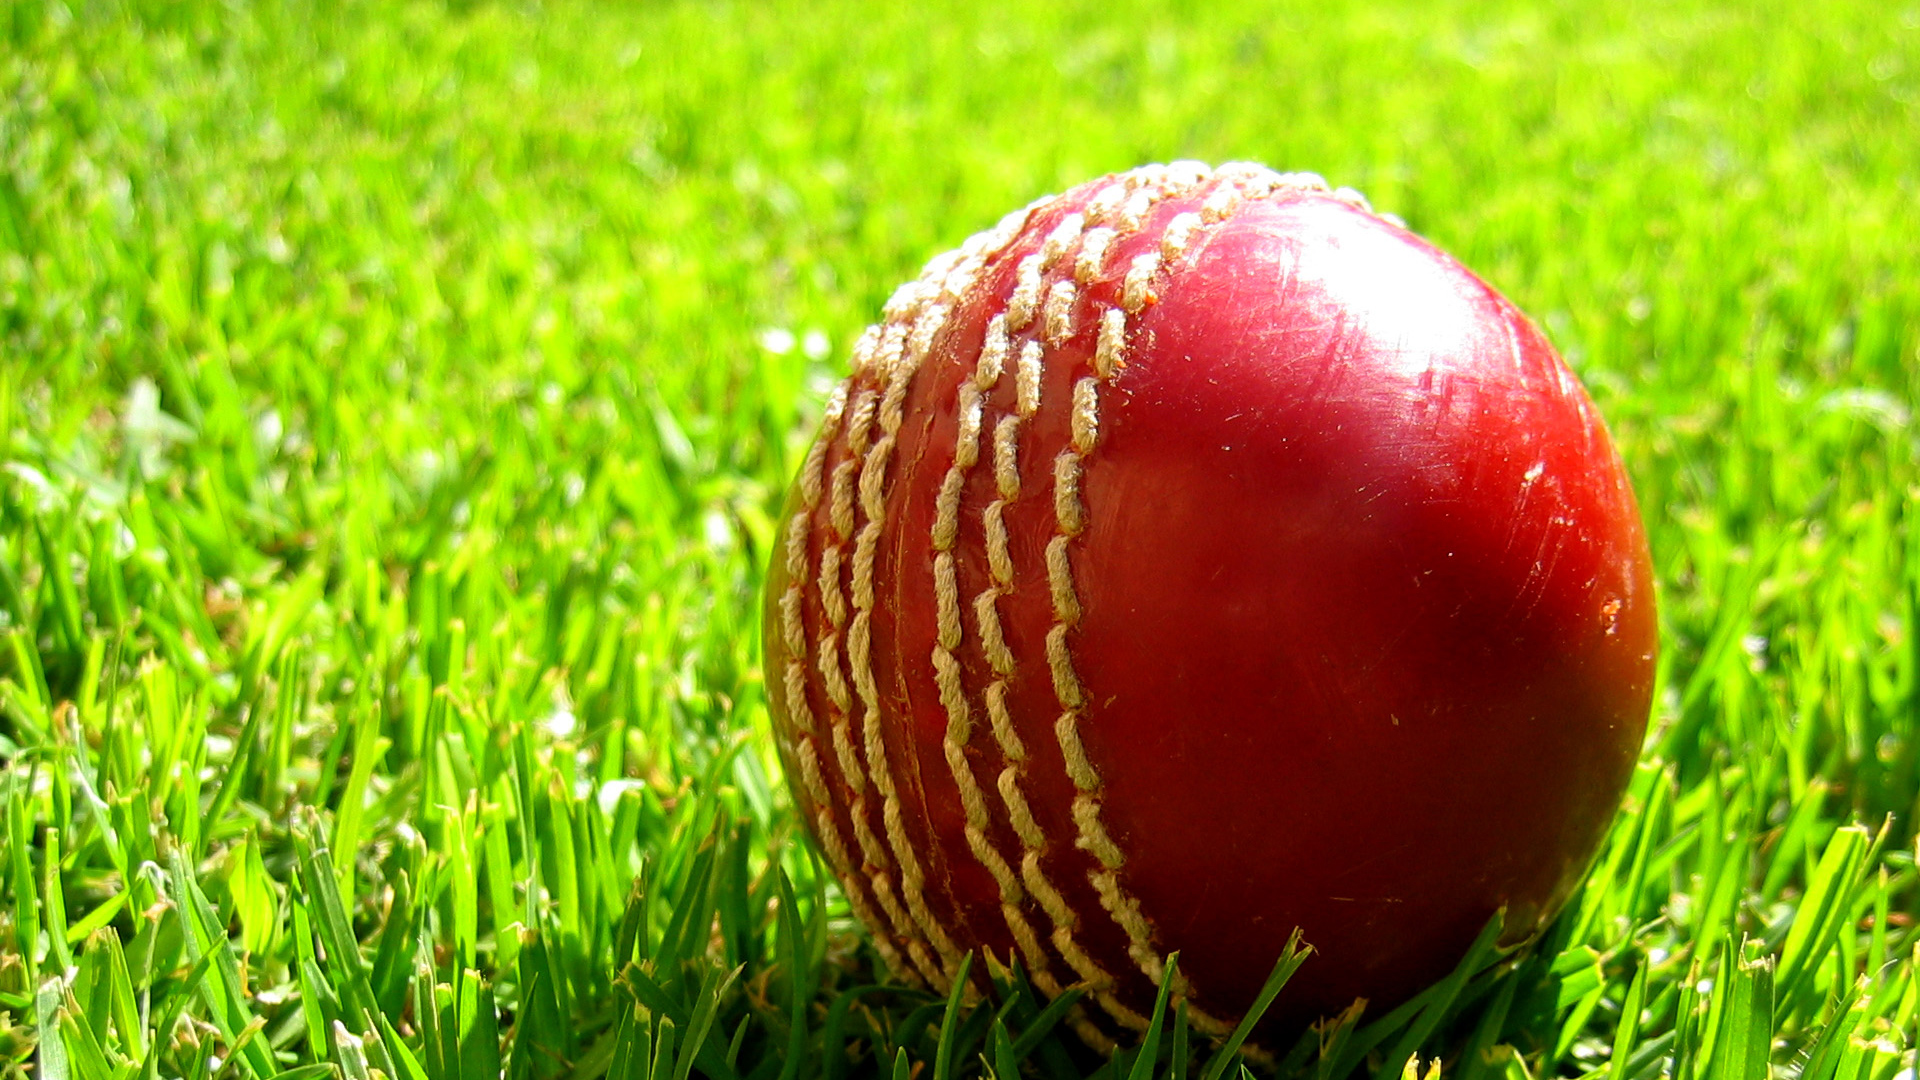 Latest Hd Images For Mobile Tablet Cricket Ball